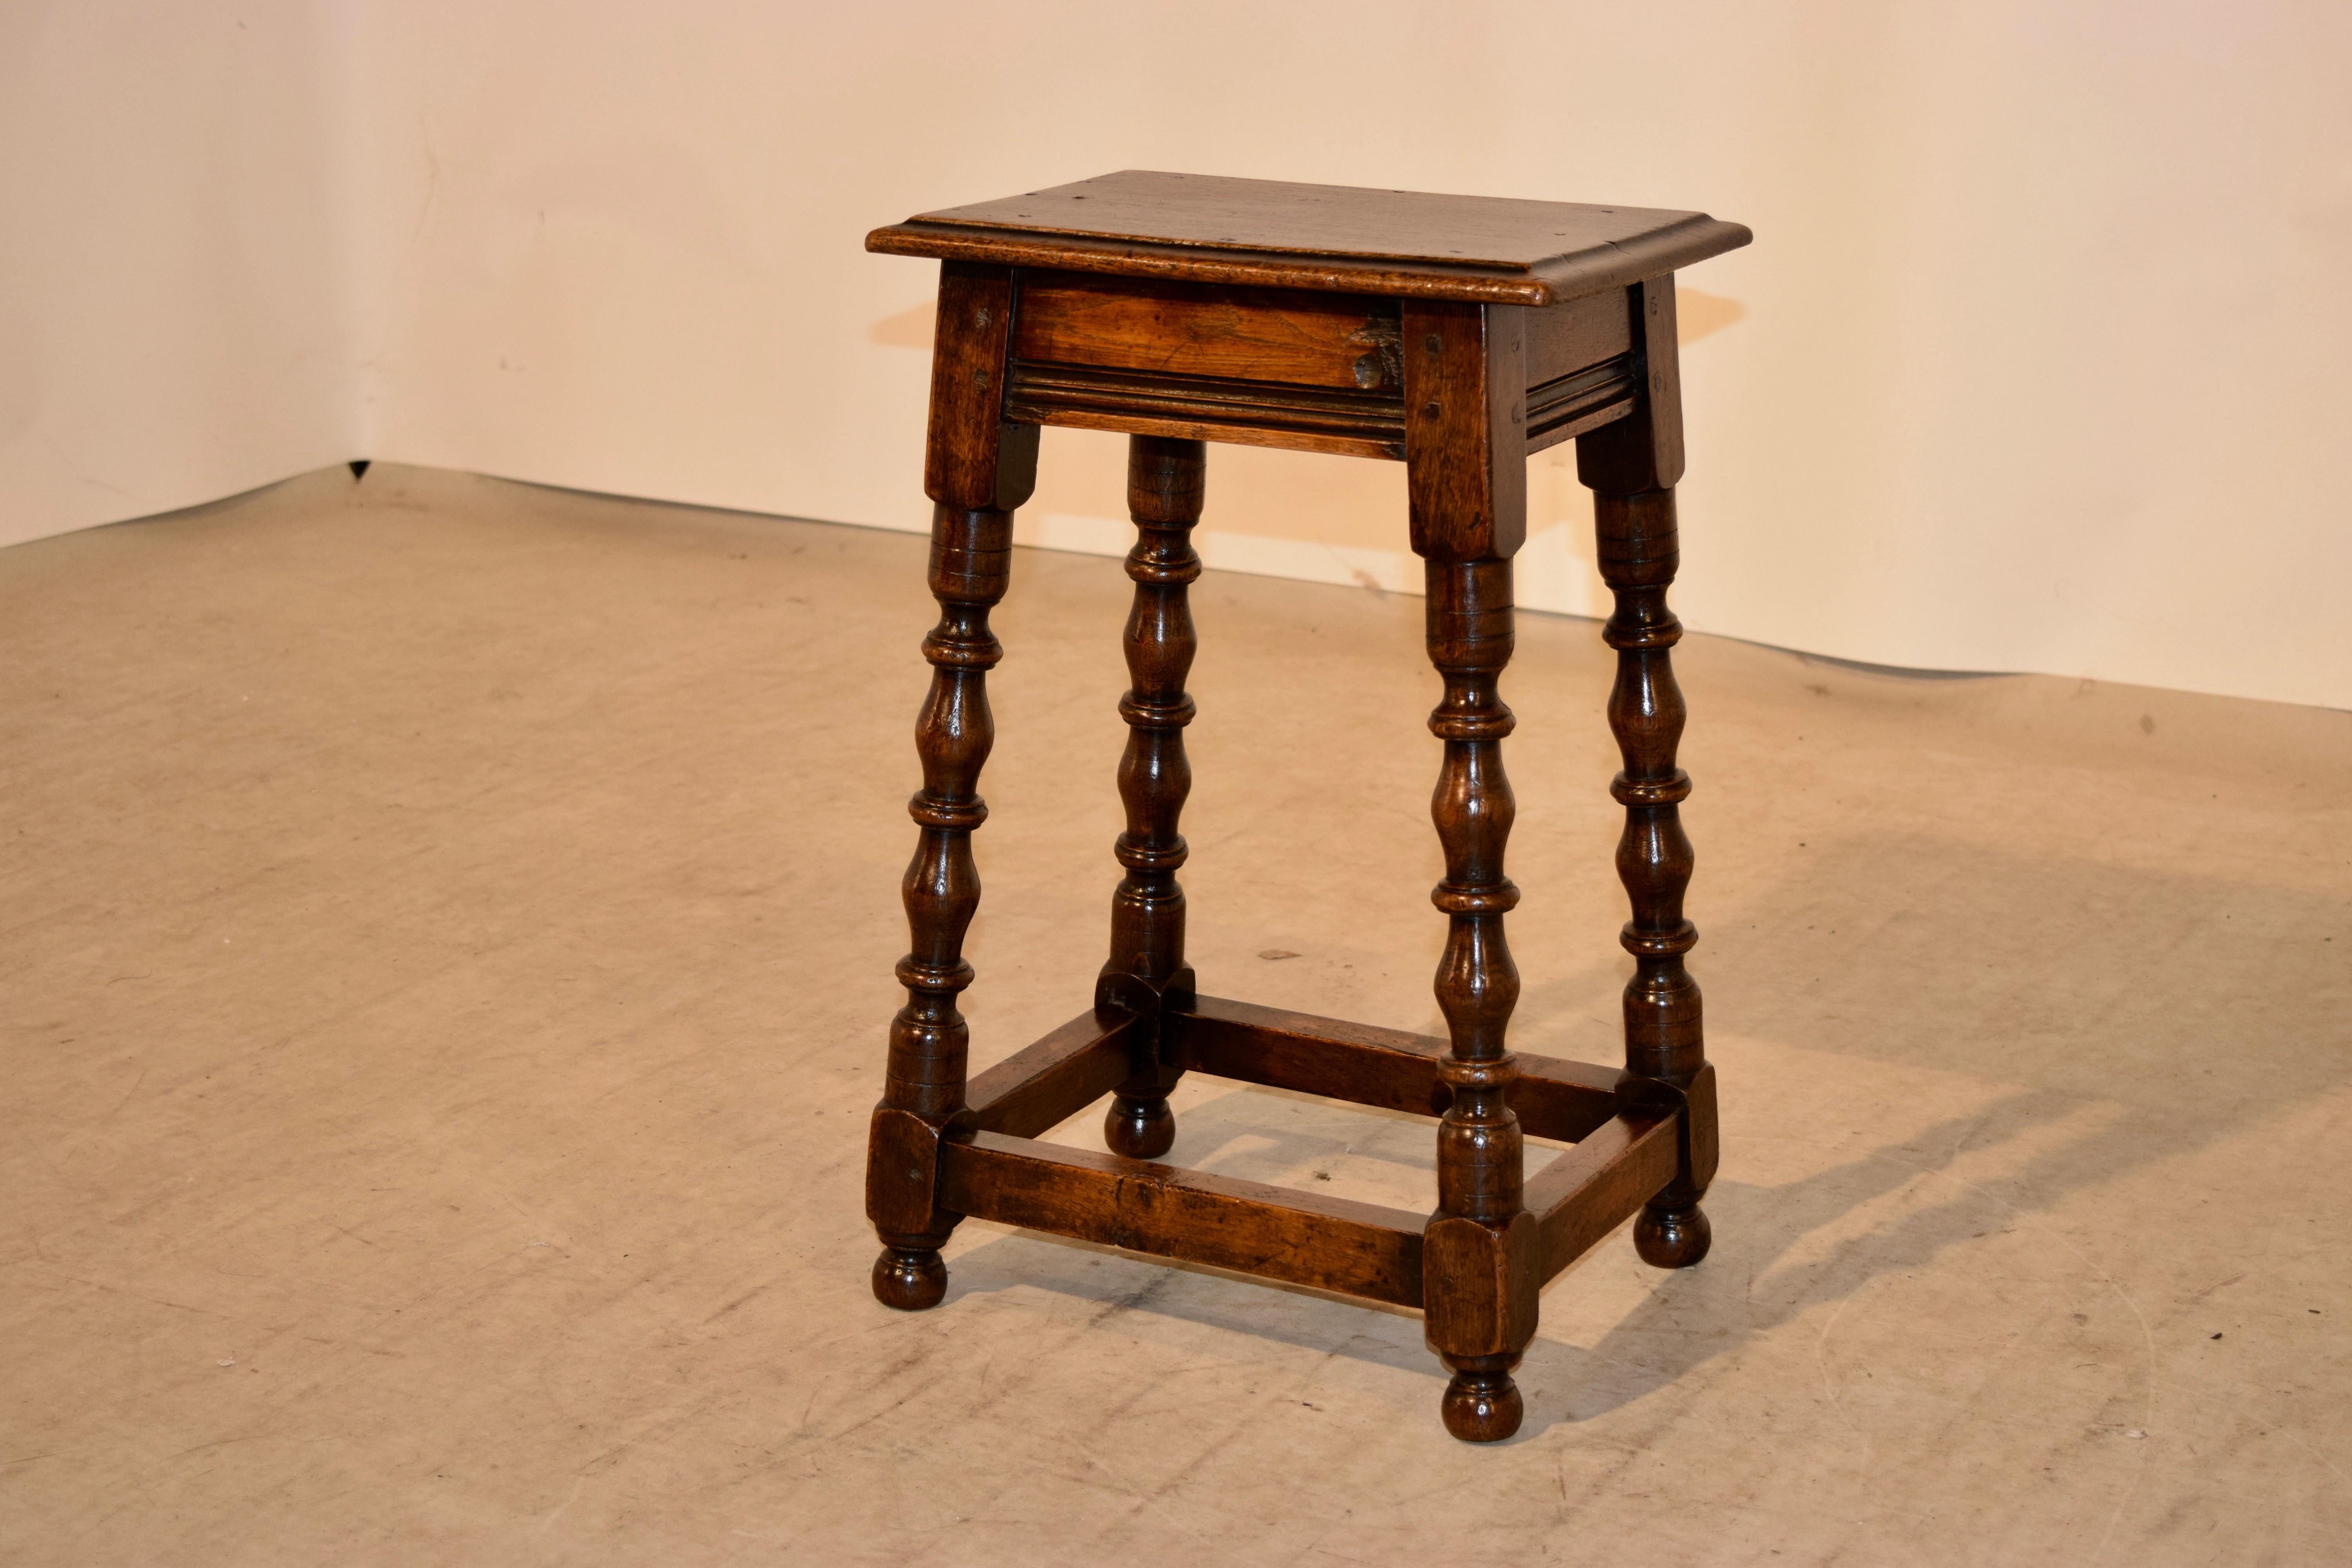 19th century English oak tall joint stool with a beveled edge around the top following down to a routed decorated apron and supported on hand turned and splayed legs joined by simple stretchers and raised on hand turned feet. Pegged construction.